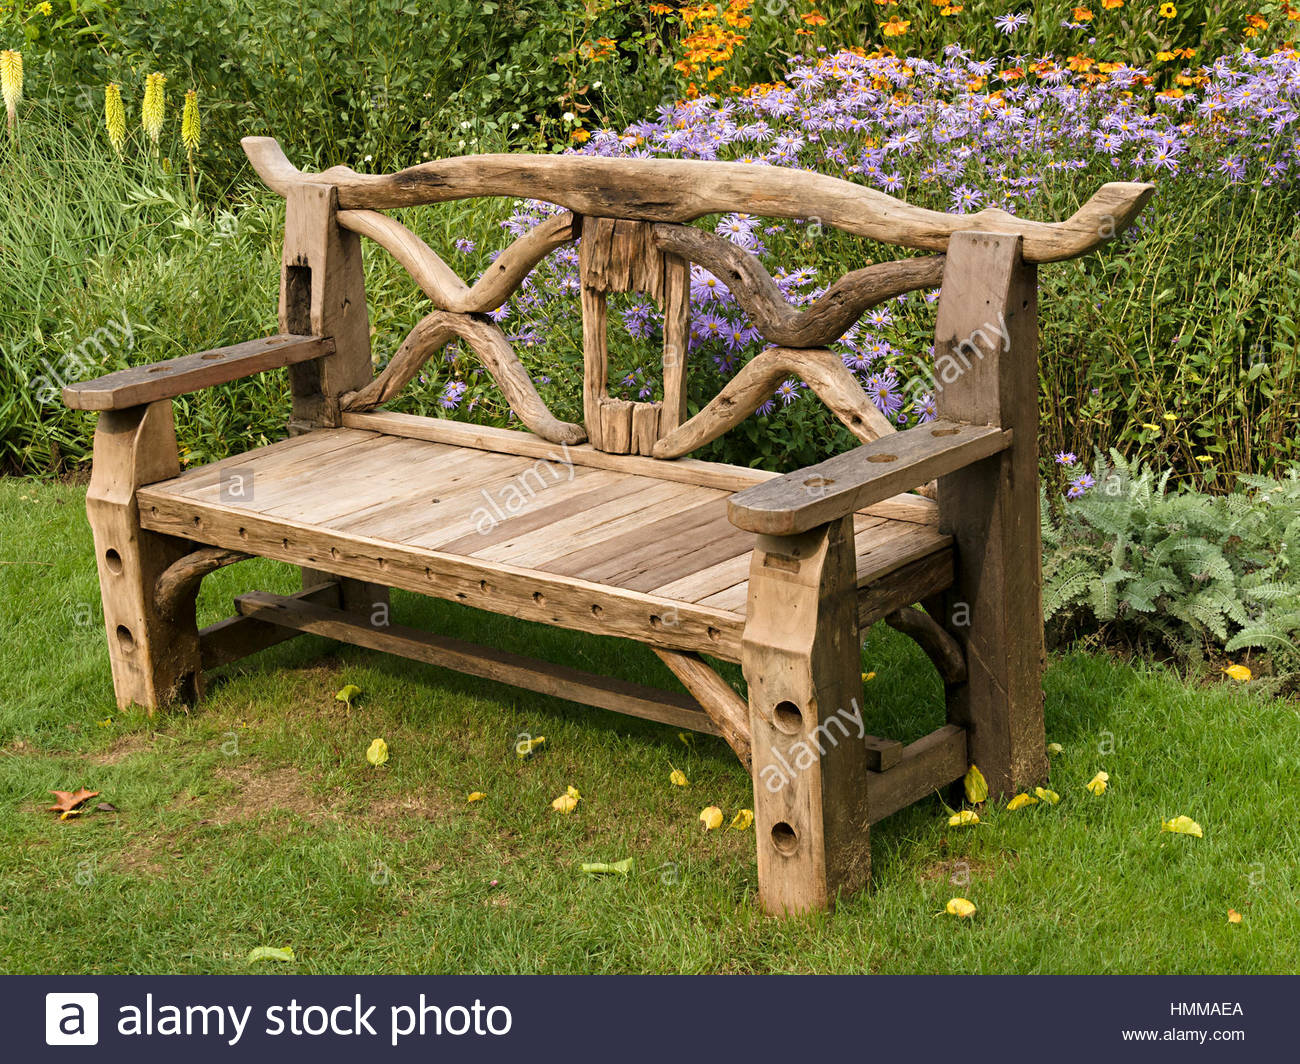 wooden garden benches ornate, rustic, wooden garden bench seat made from recycled wooden parts, DQGLMEG